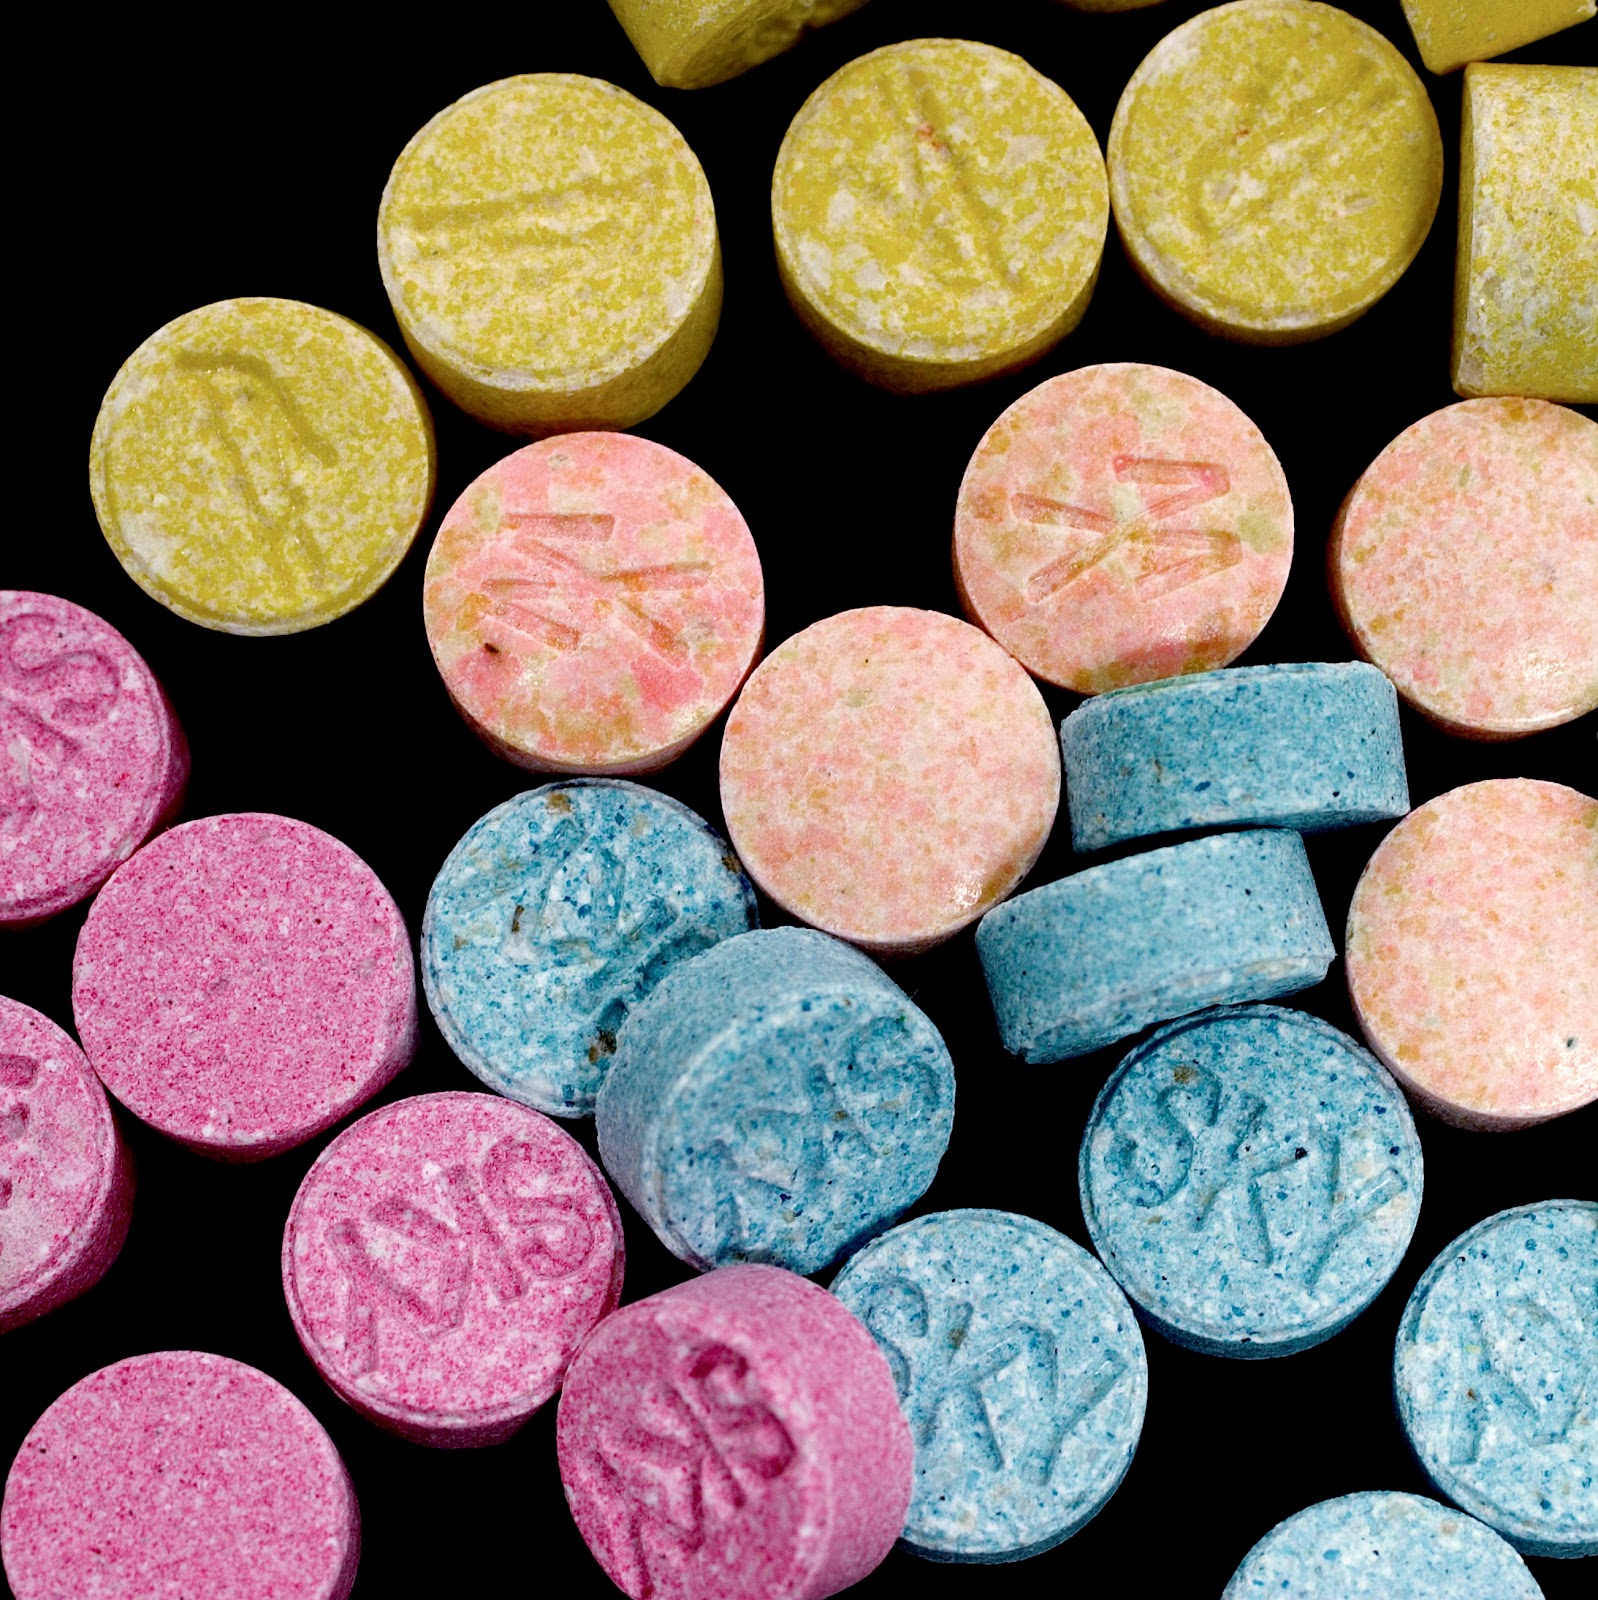 Rehabilitation Drugs For Bad Effects Of Health - Ecstasy Pills Png , HD Wallpaper & Backgrounds